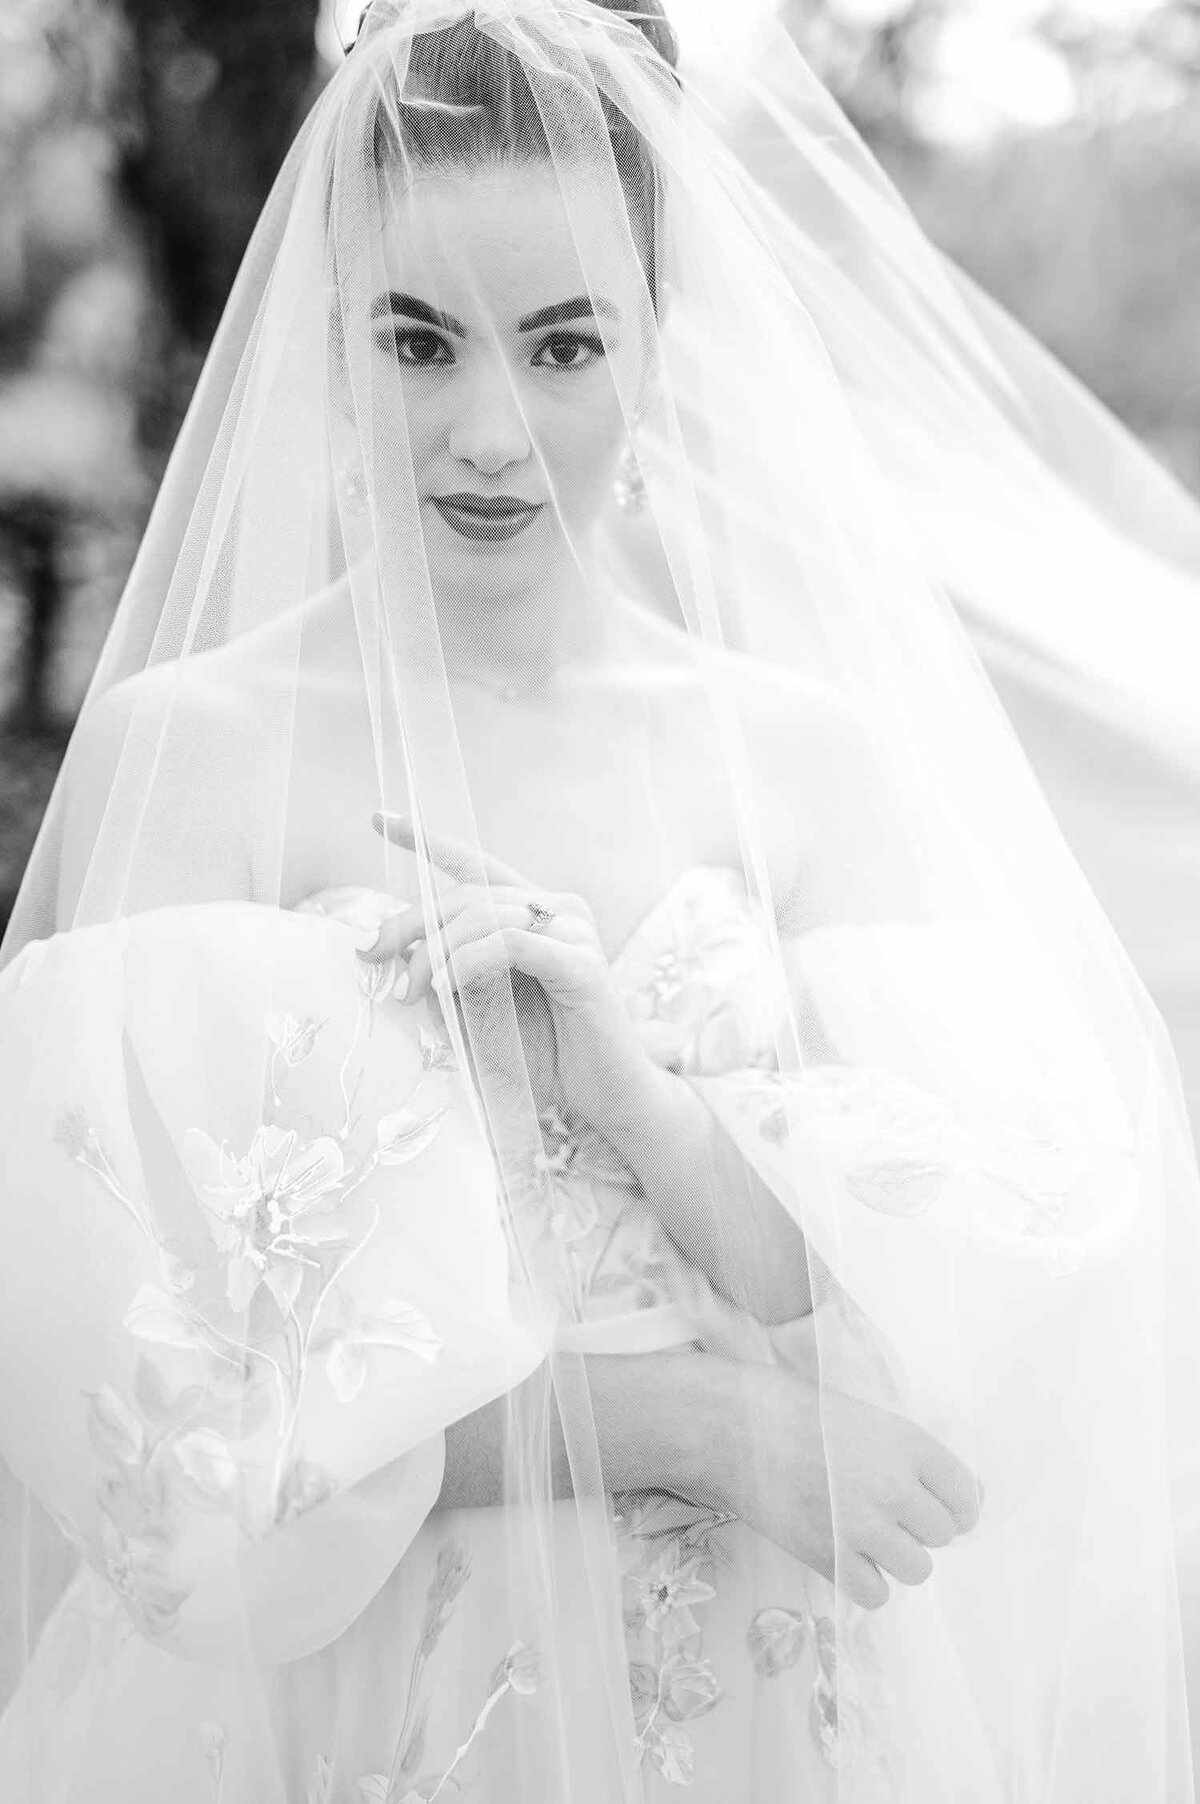 Black and White Editorial Style Wedding Photographer